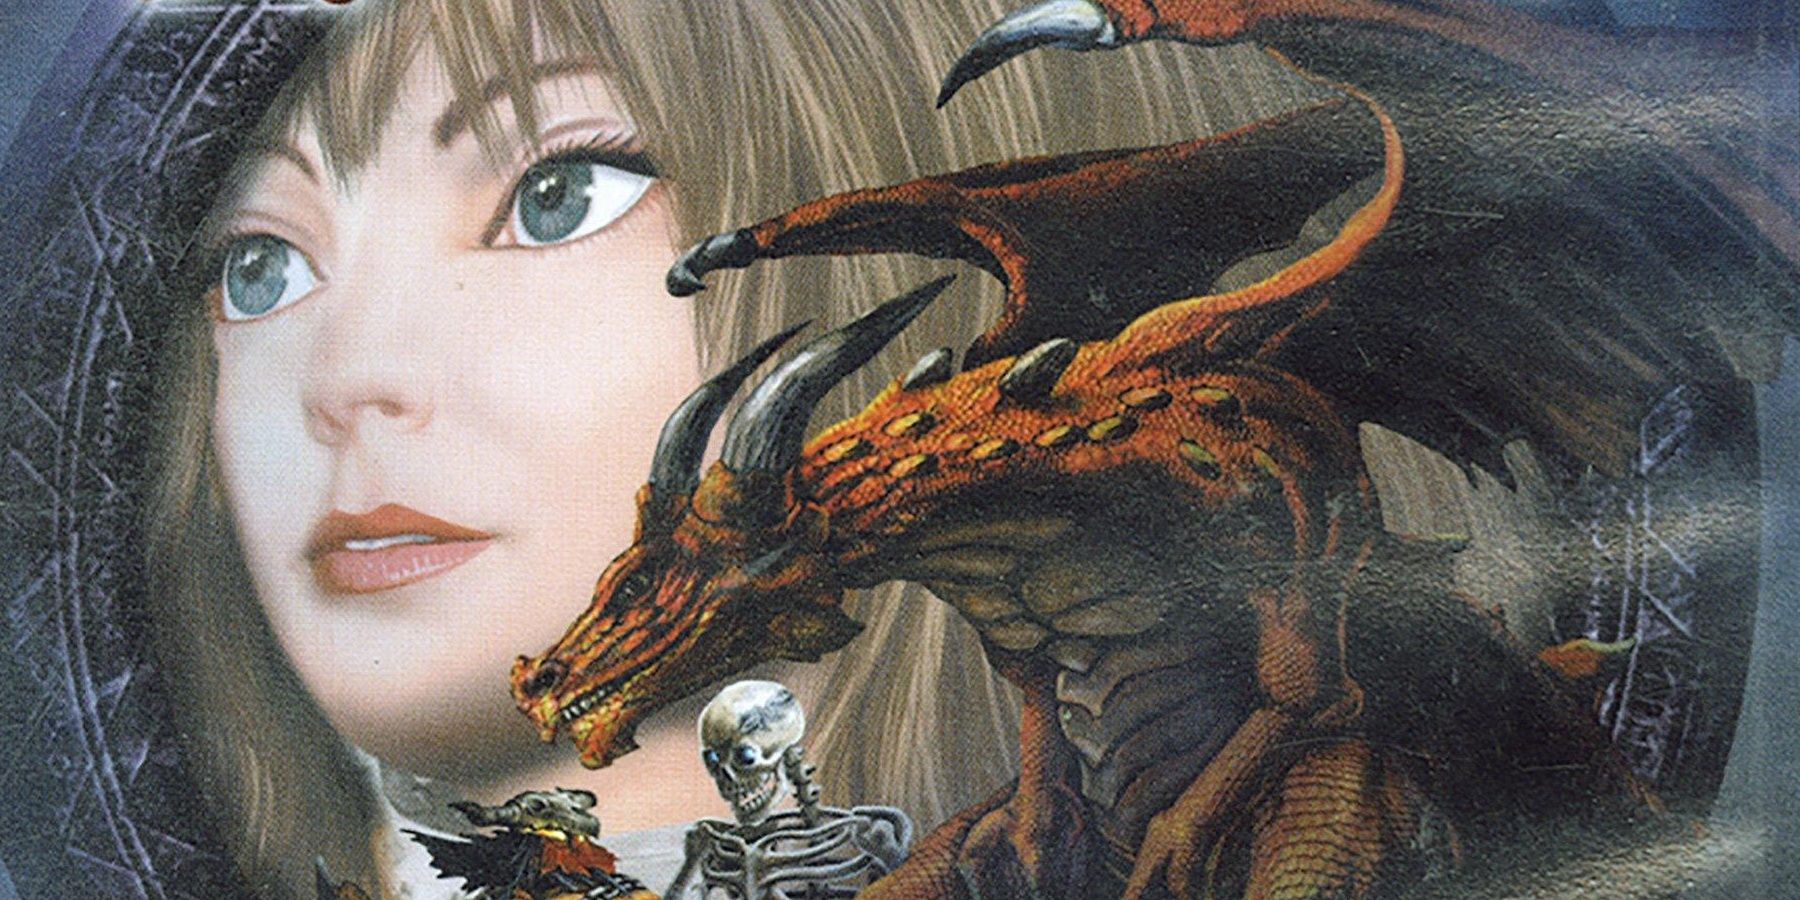 The 10 Best FromSoftware Games (According To Reddit)